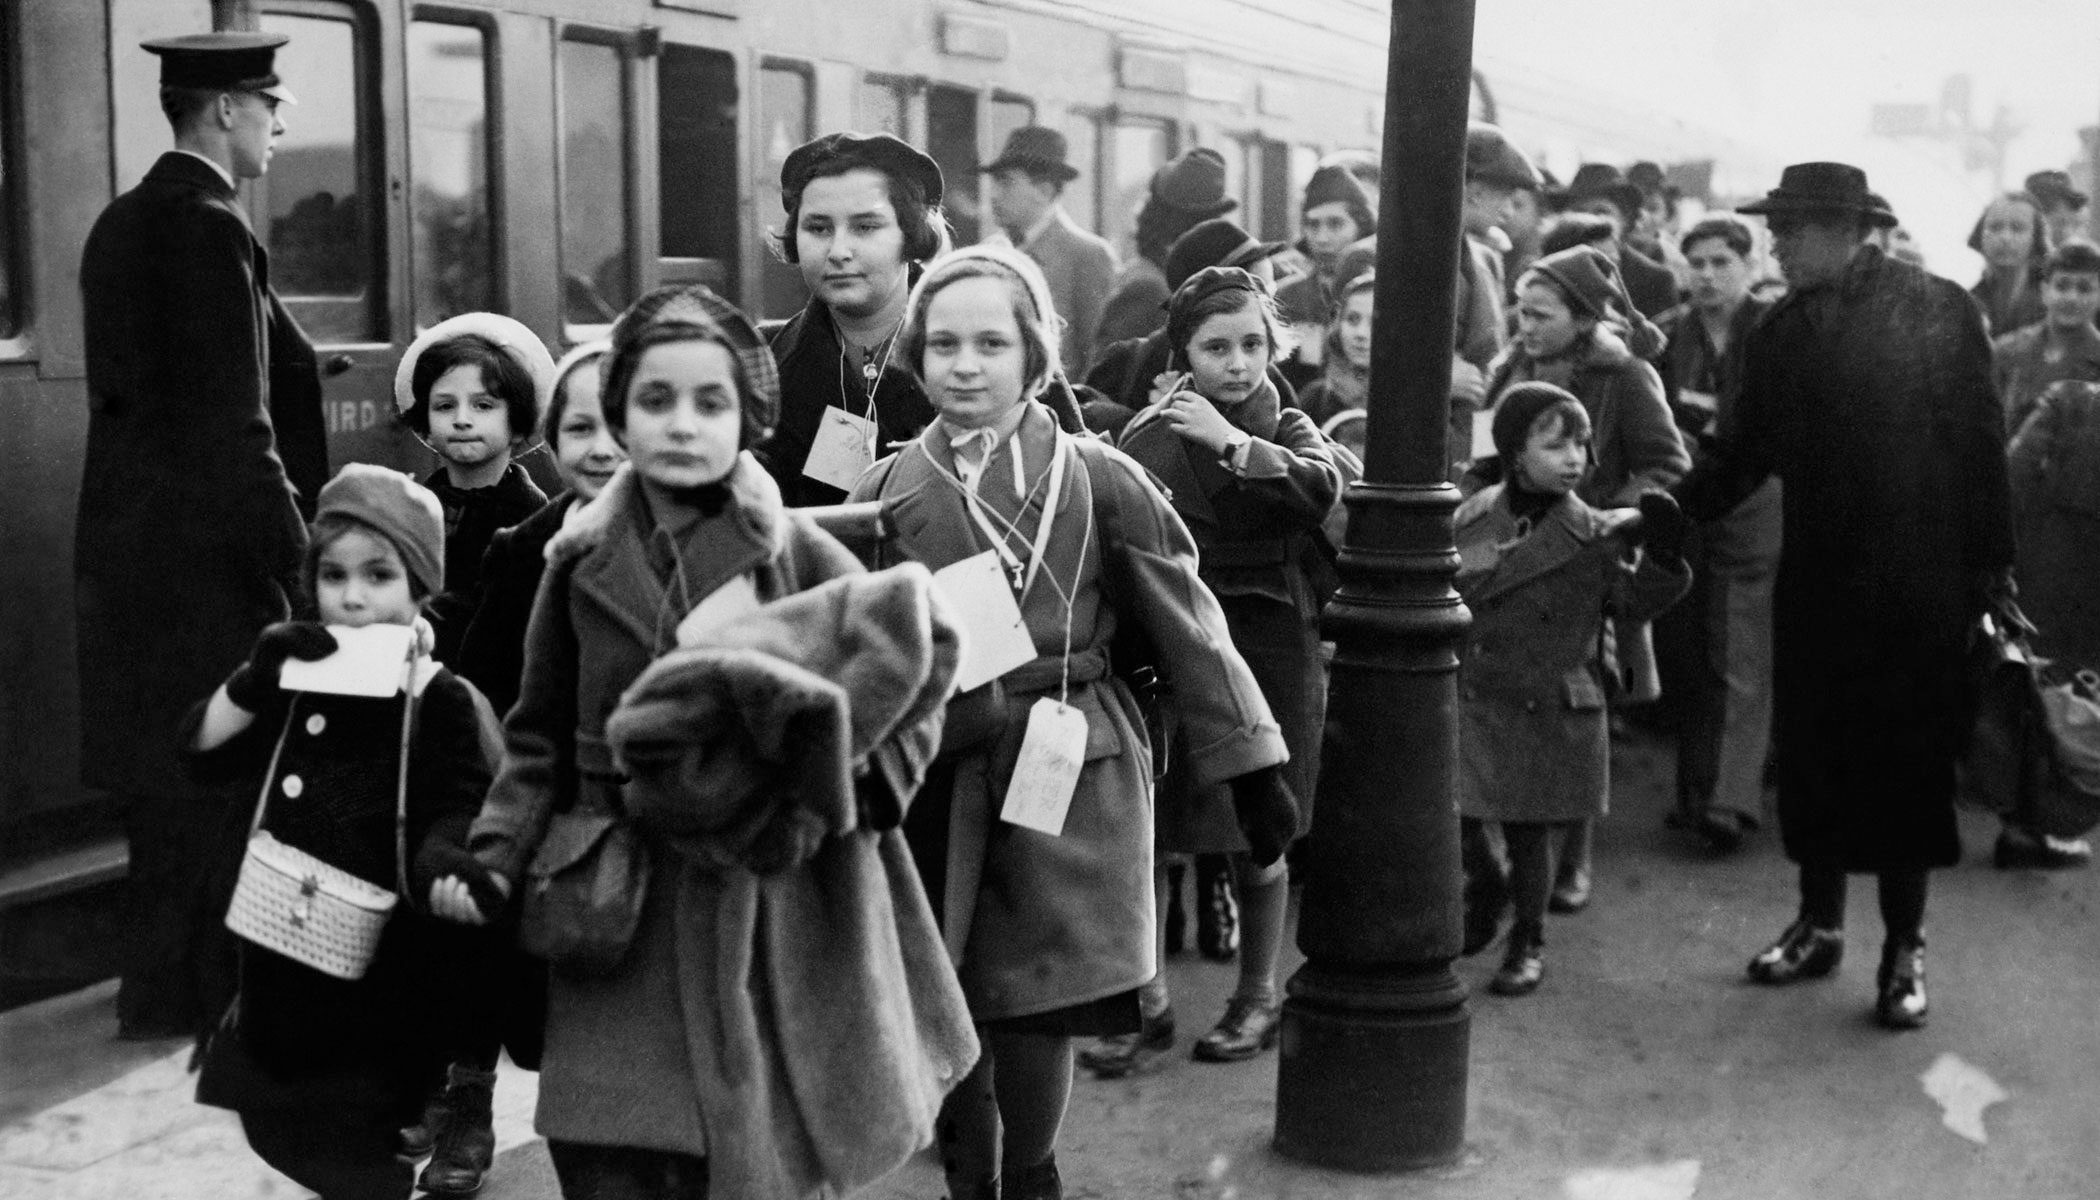 New Study Reveals U.K. Respondents Believe Two Million or Fewer Jews Were Killed in the Holocaust